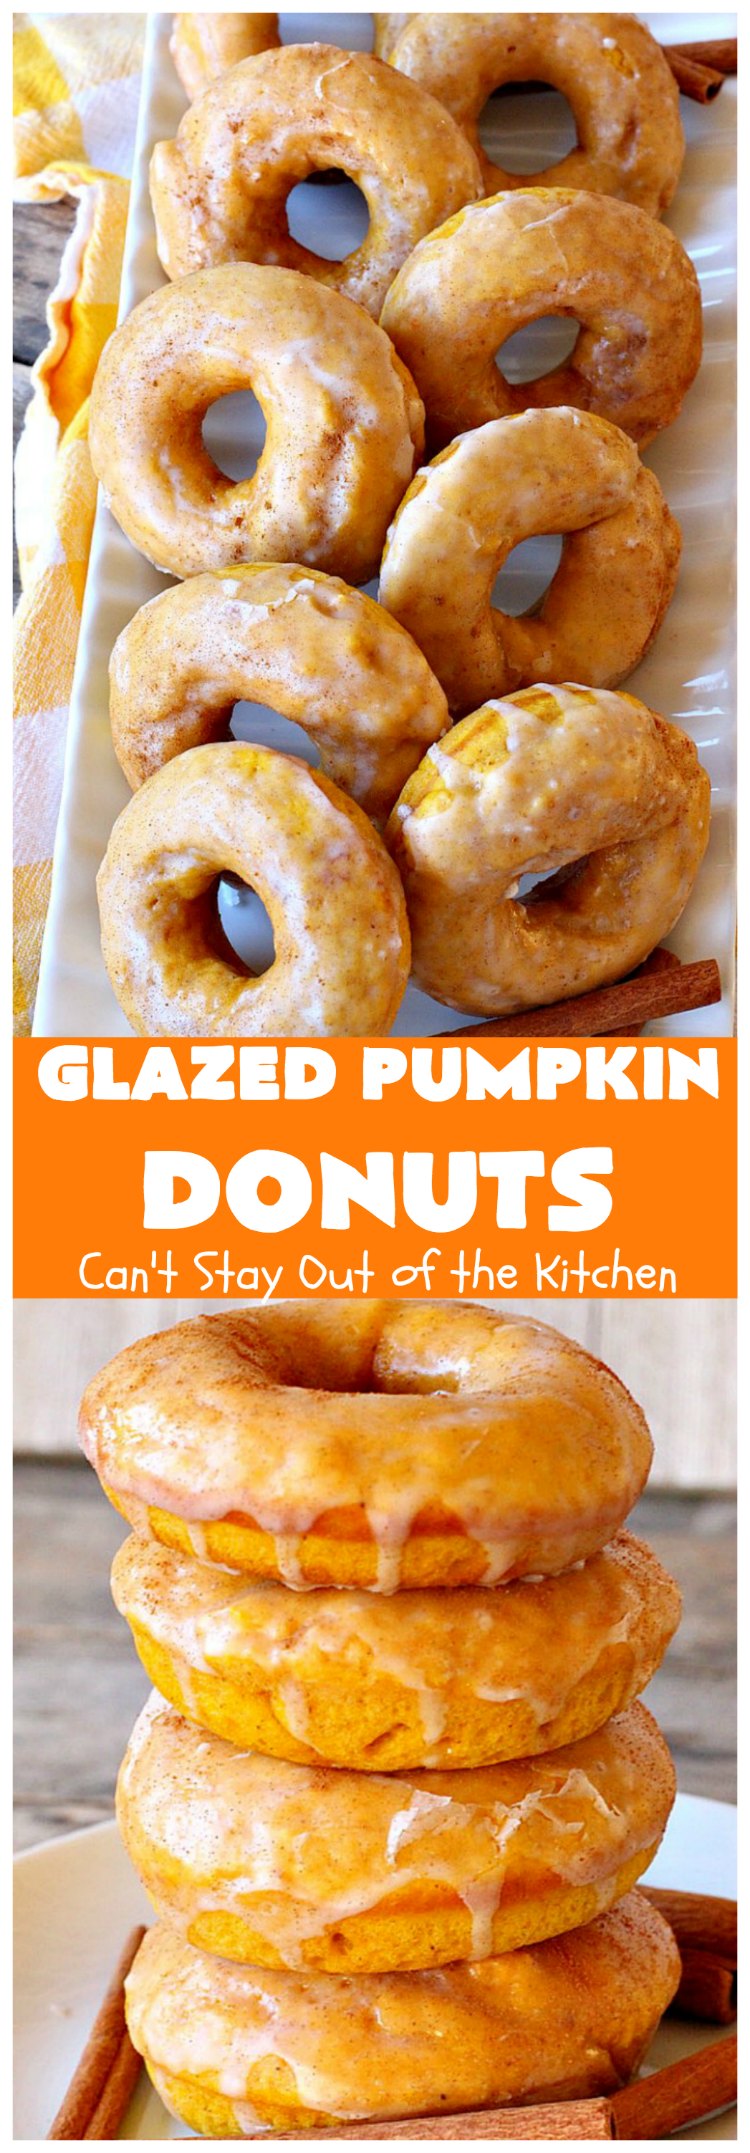 Glazed Pumpkin Donuts | Can't Stay Out of the Kitchen